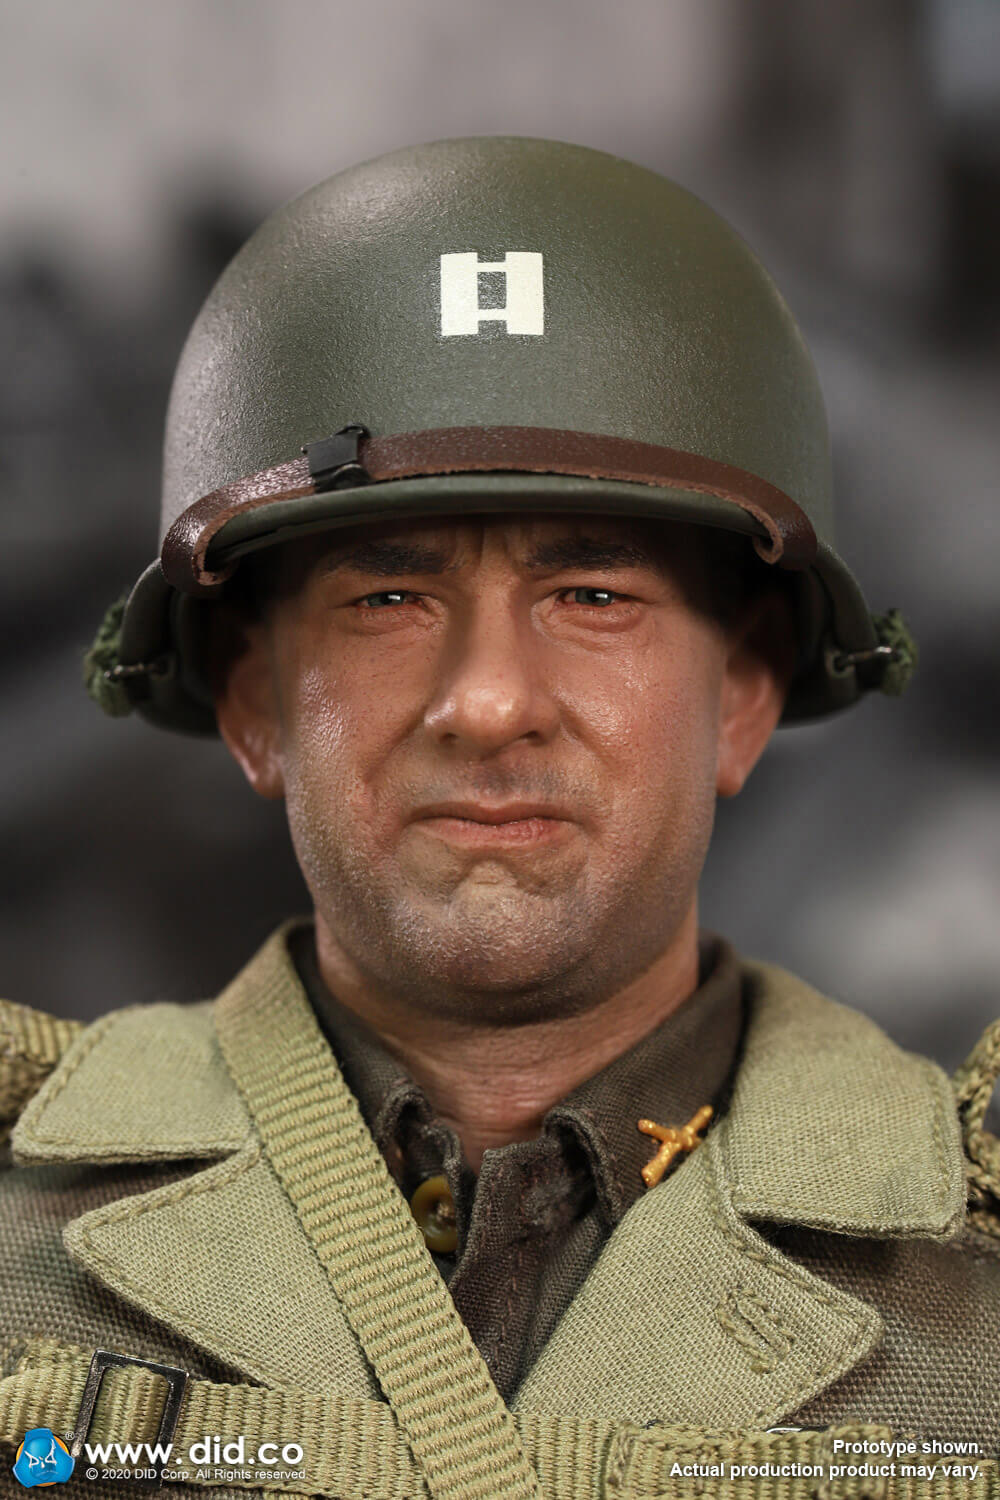 male - NEW PRODUCT: DiD: A80145 1/6 scale WWII US 2nd Ranger Battalion Series 3 Captain Miller 2659